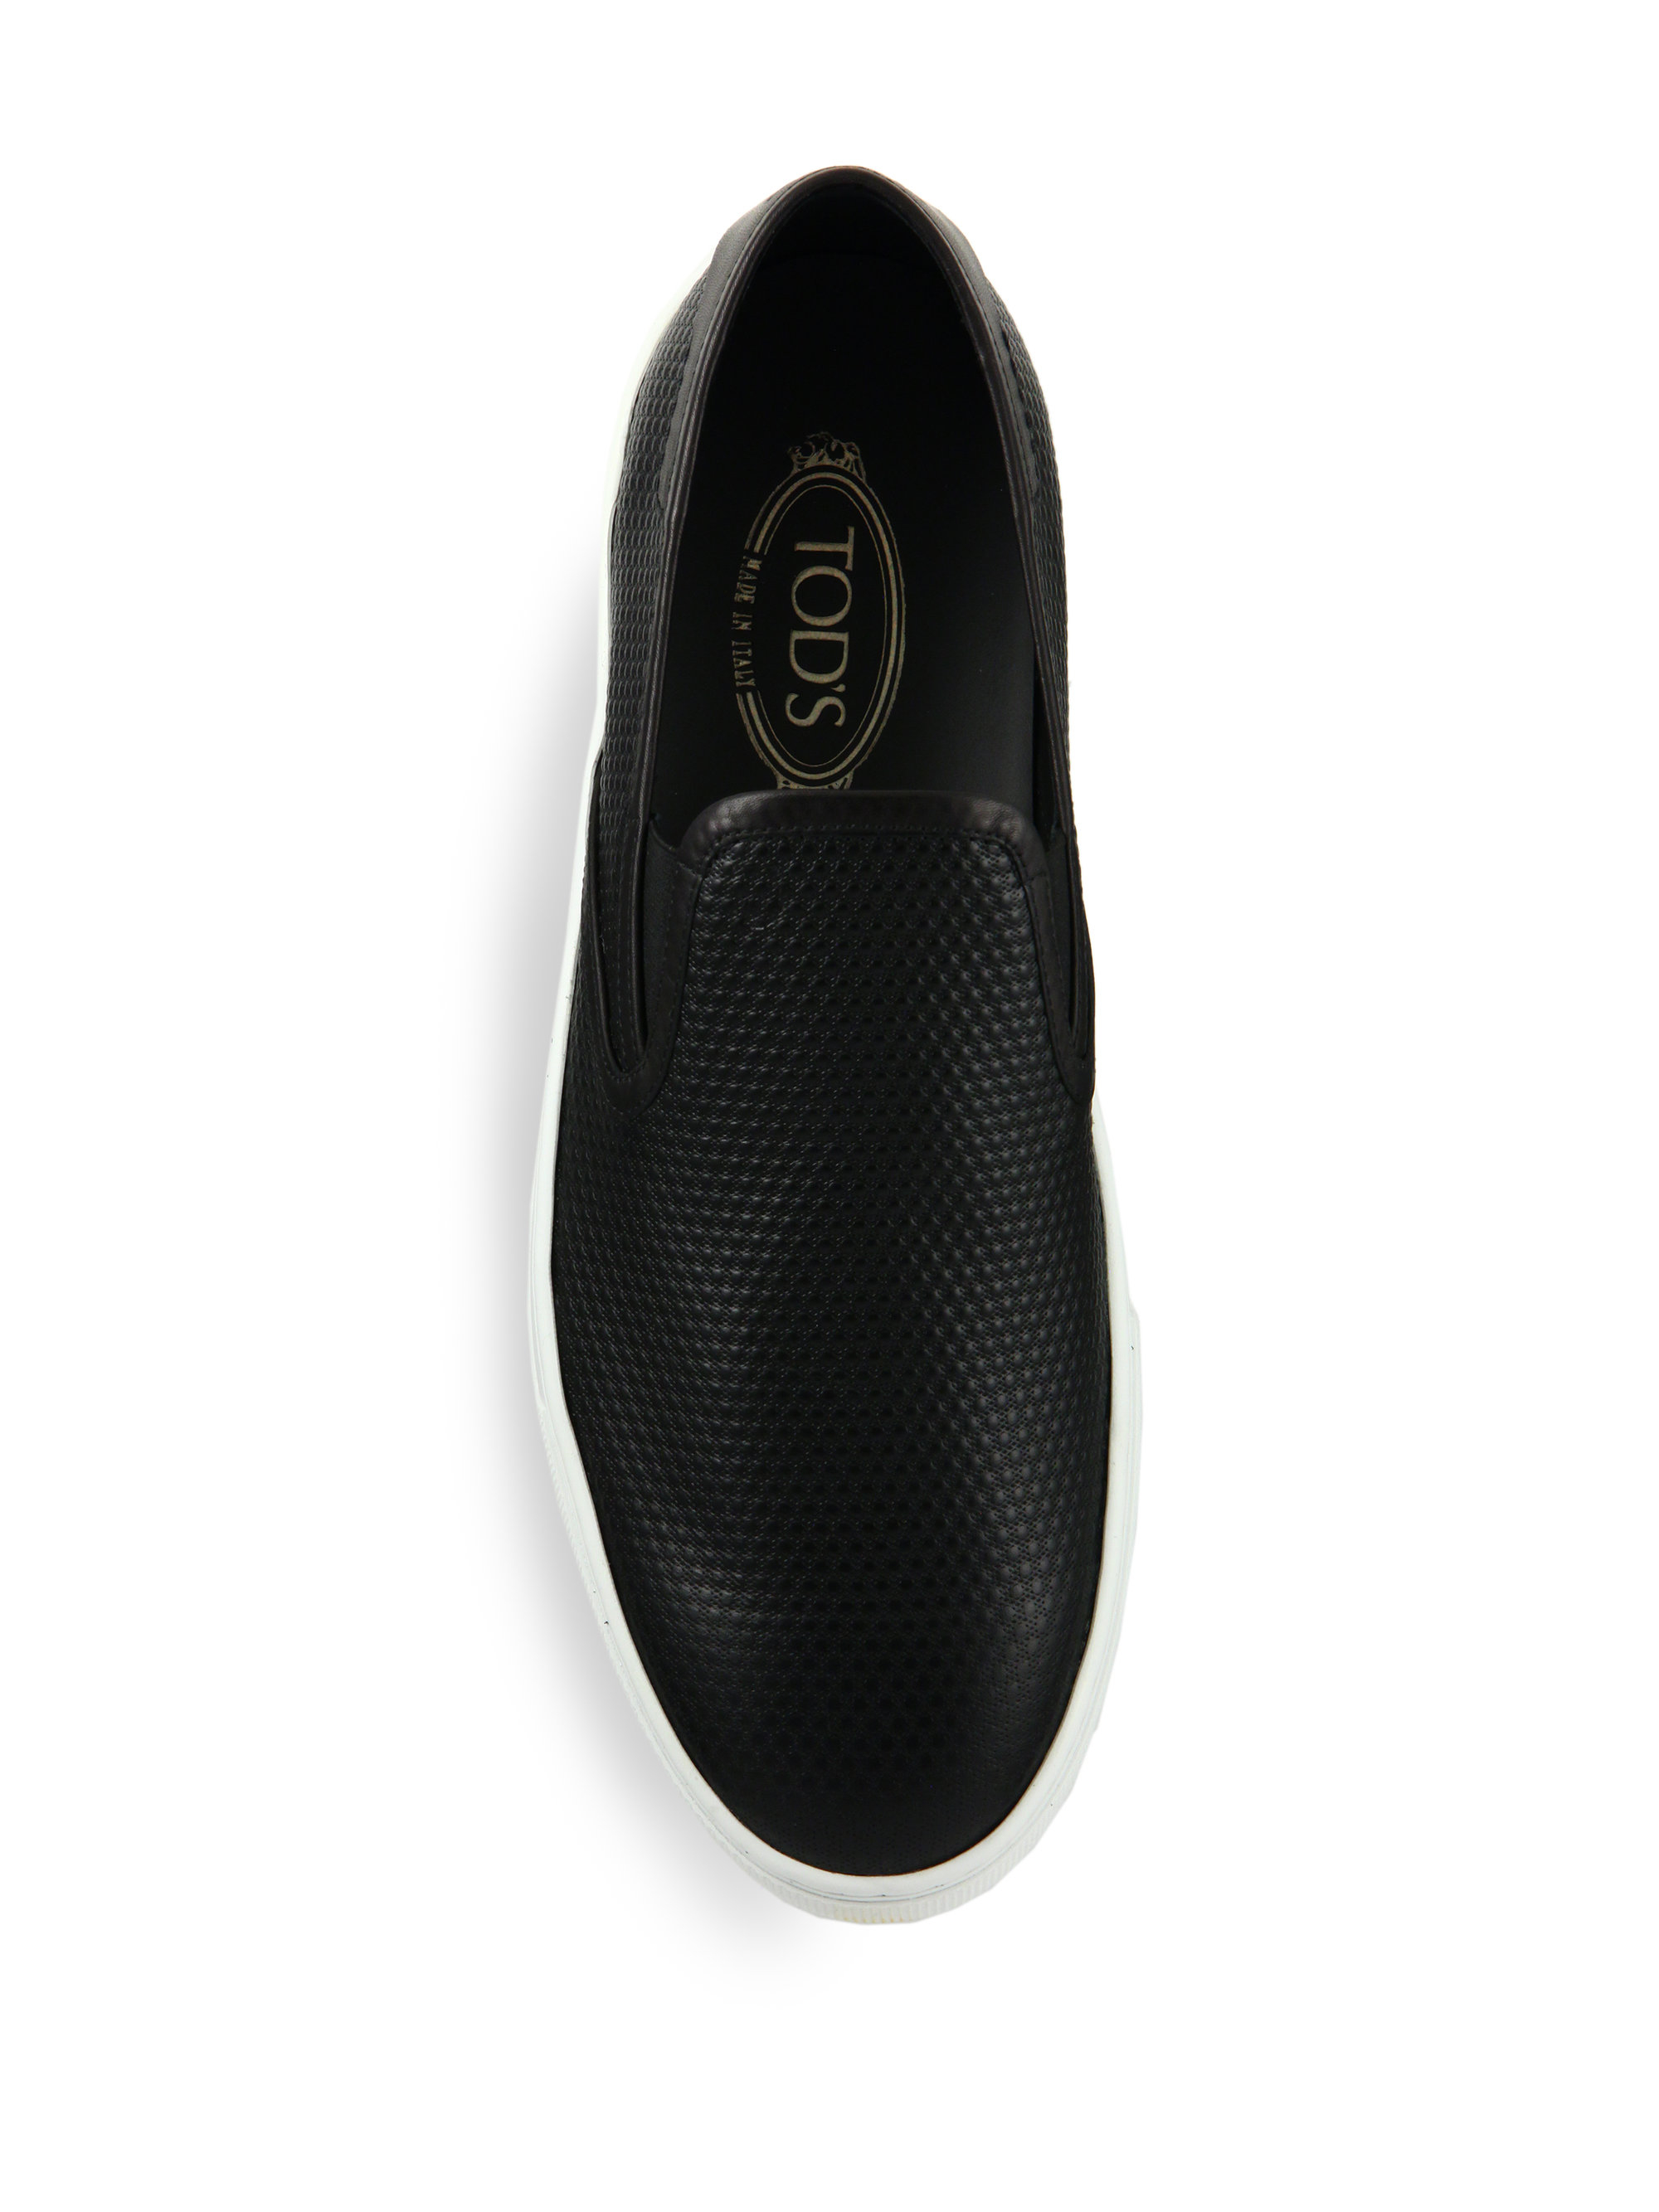 Tod's Textured Leather Slip-on Sneakers in Black for Men - Lyst